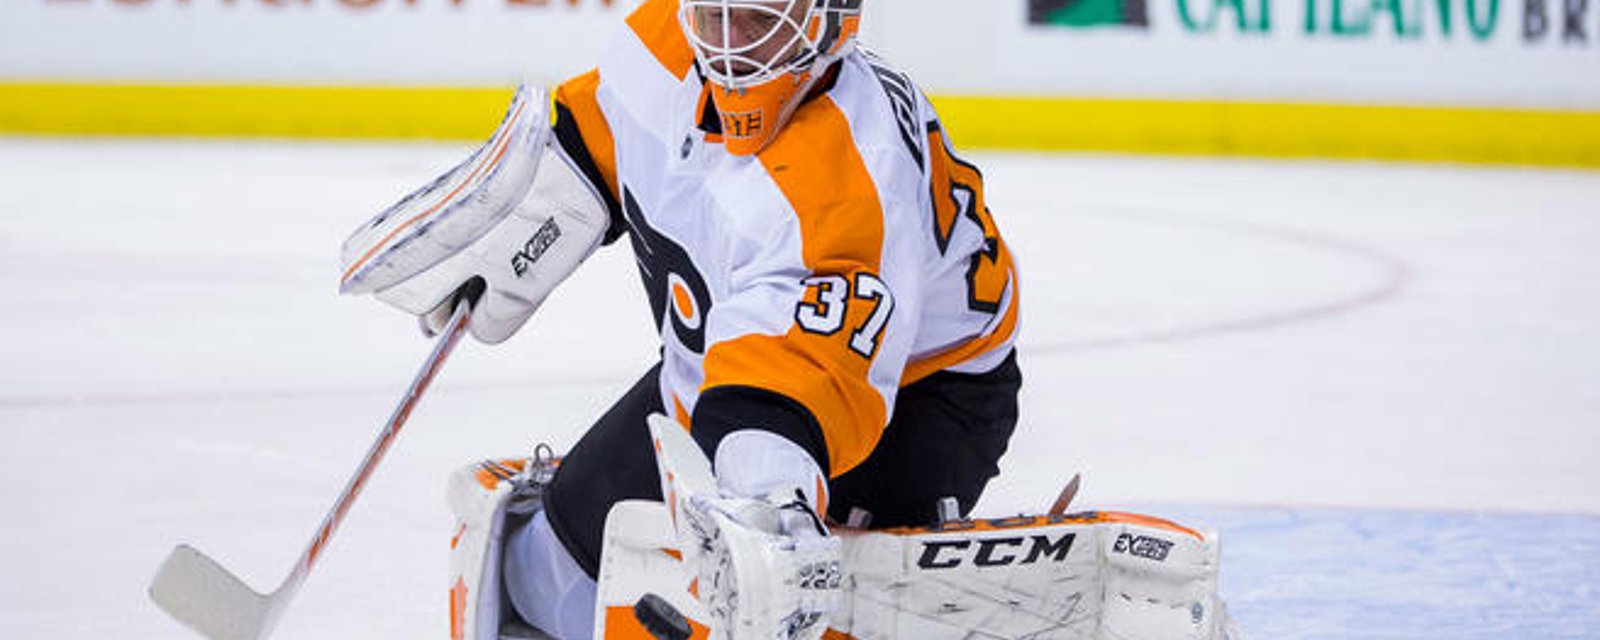 Flyers in the middle of yet another goalie trade?! 